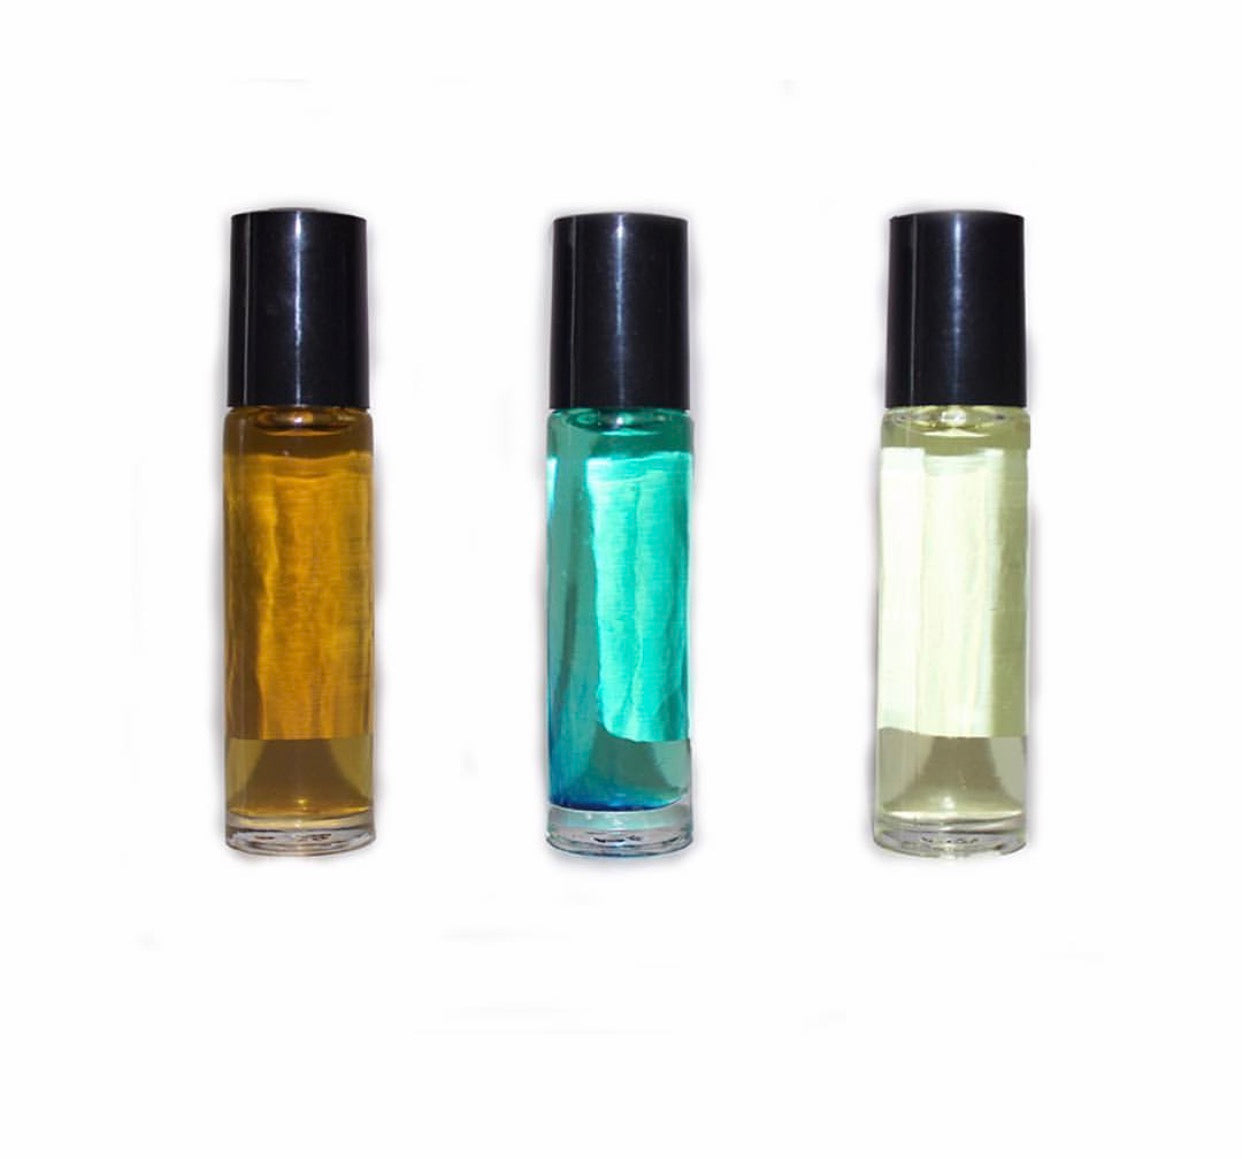 Body Oils Wholesale, Fragrance Oils, Perfume Oils, Scented Oils - Prefilled  from $0.85